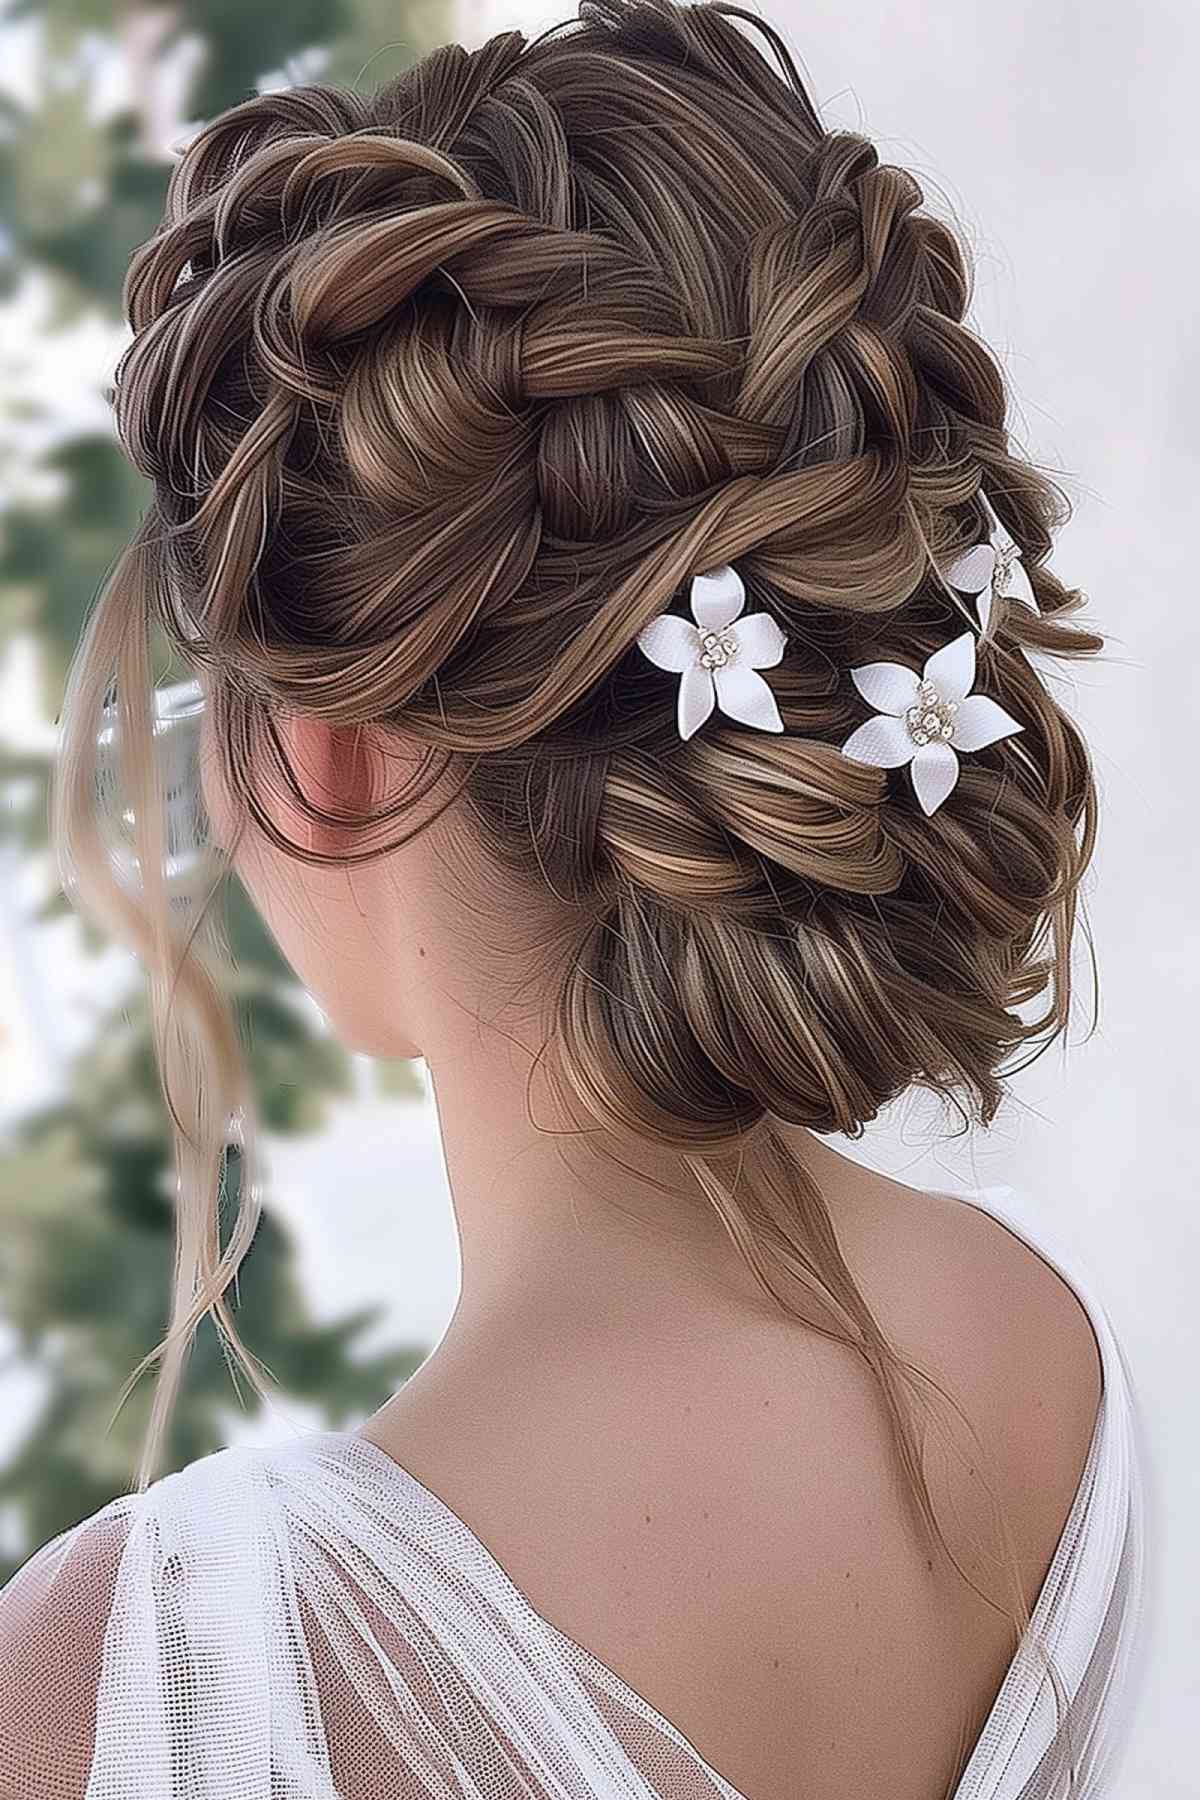 Romantic bridal updo with braids and white floral accessories